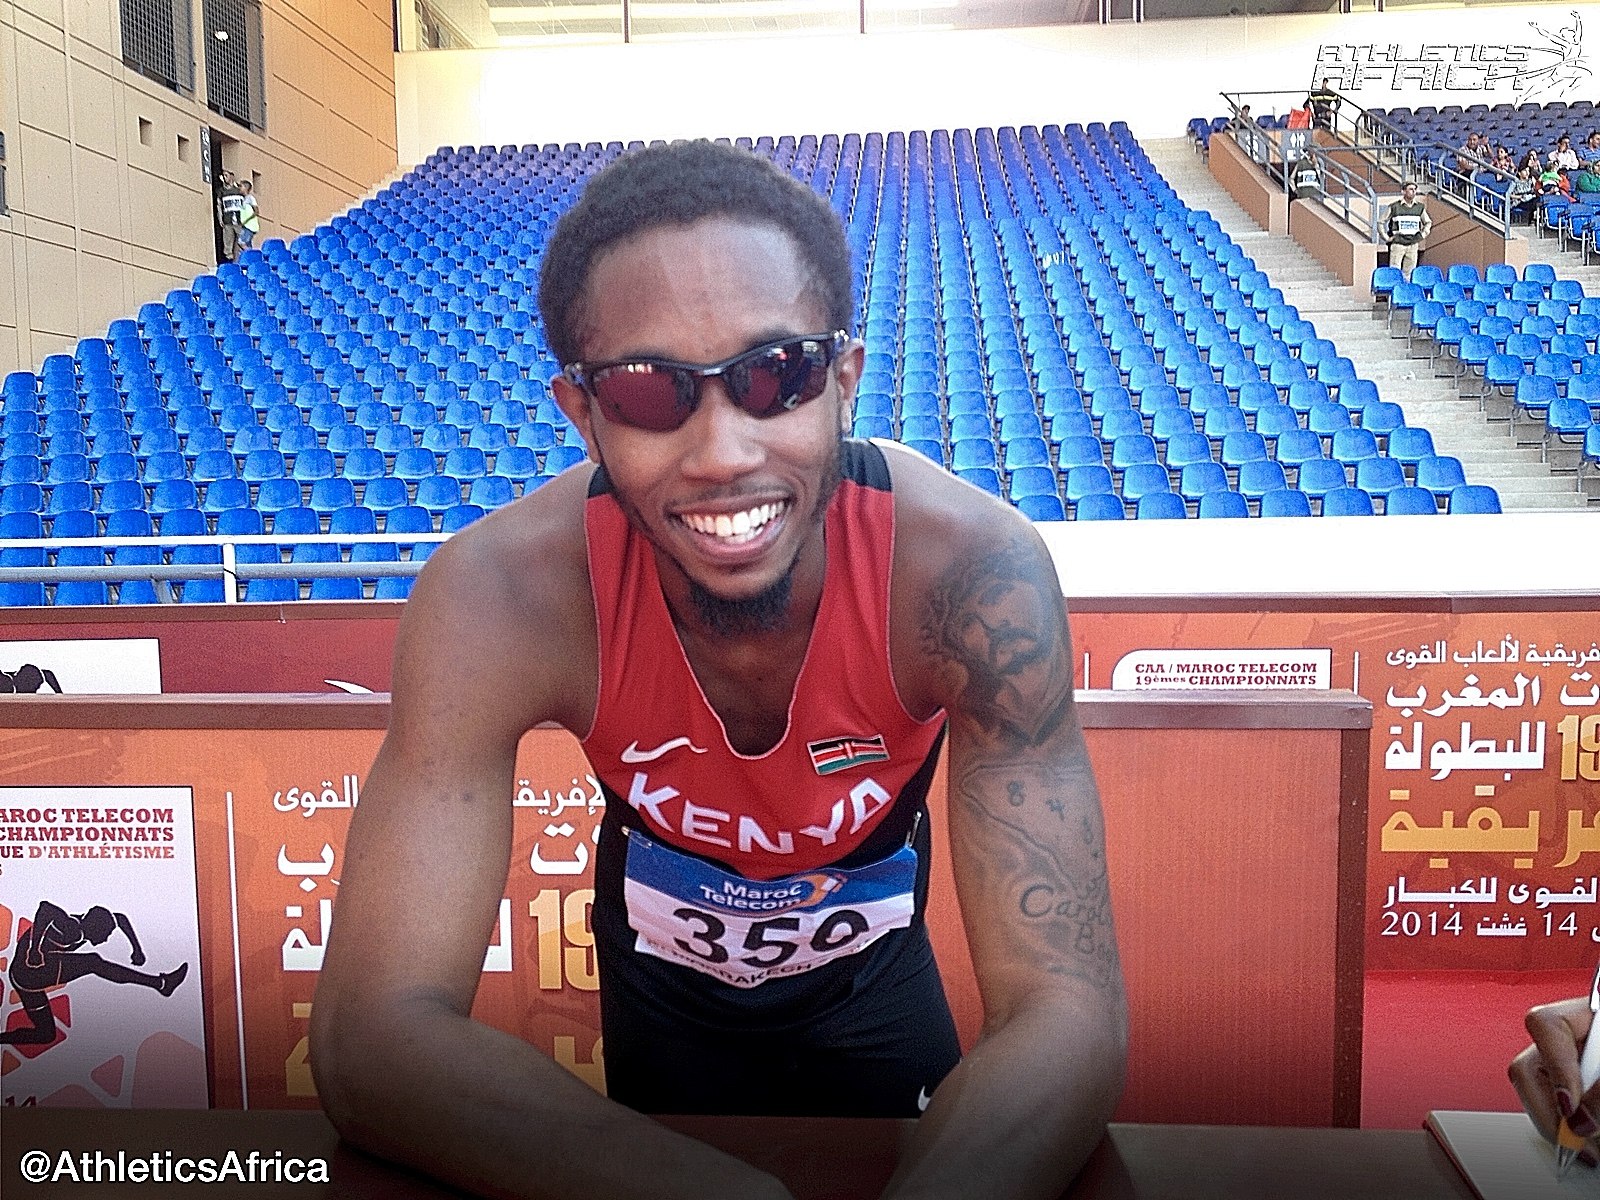 Carvin Nkanata recovers after the 200m final at the African Senior Championships in Marrakech 2014 / Photo credit: Yomi Omogbeja